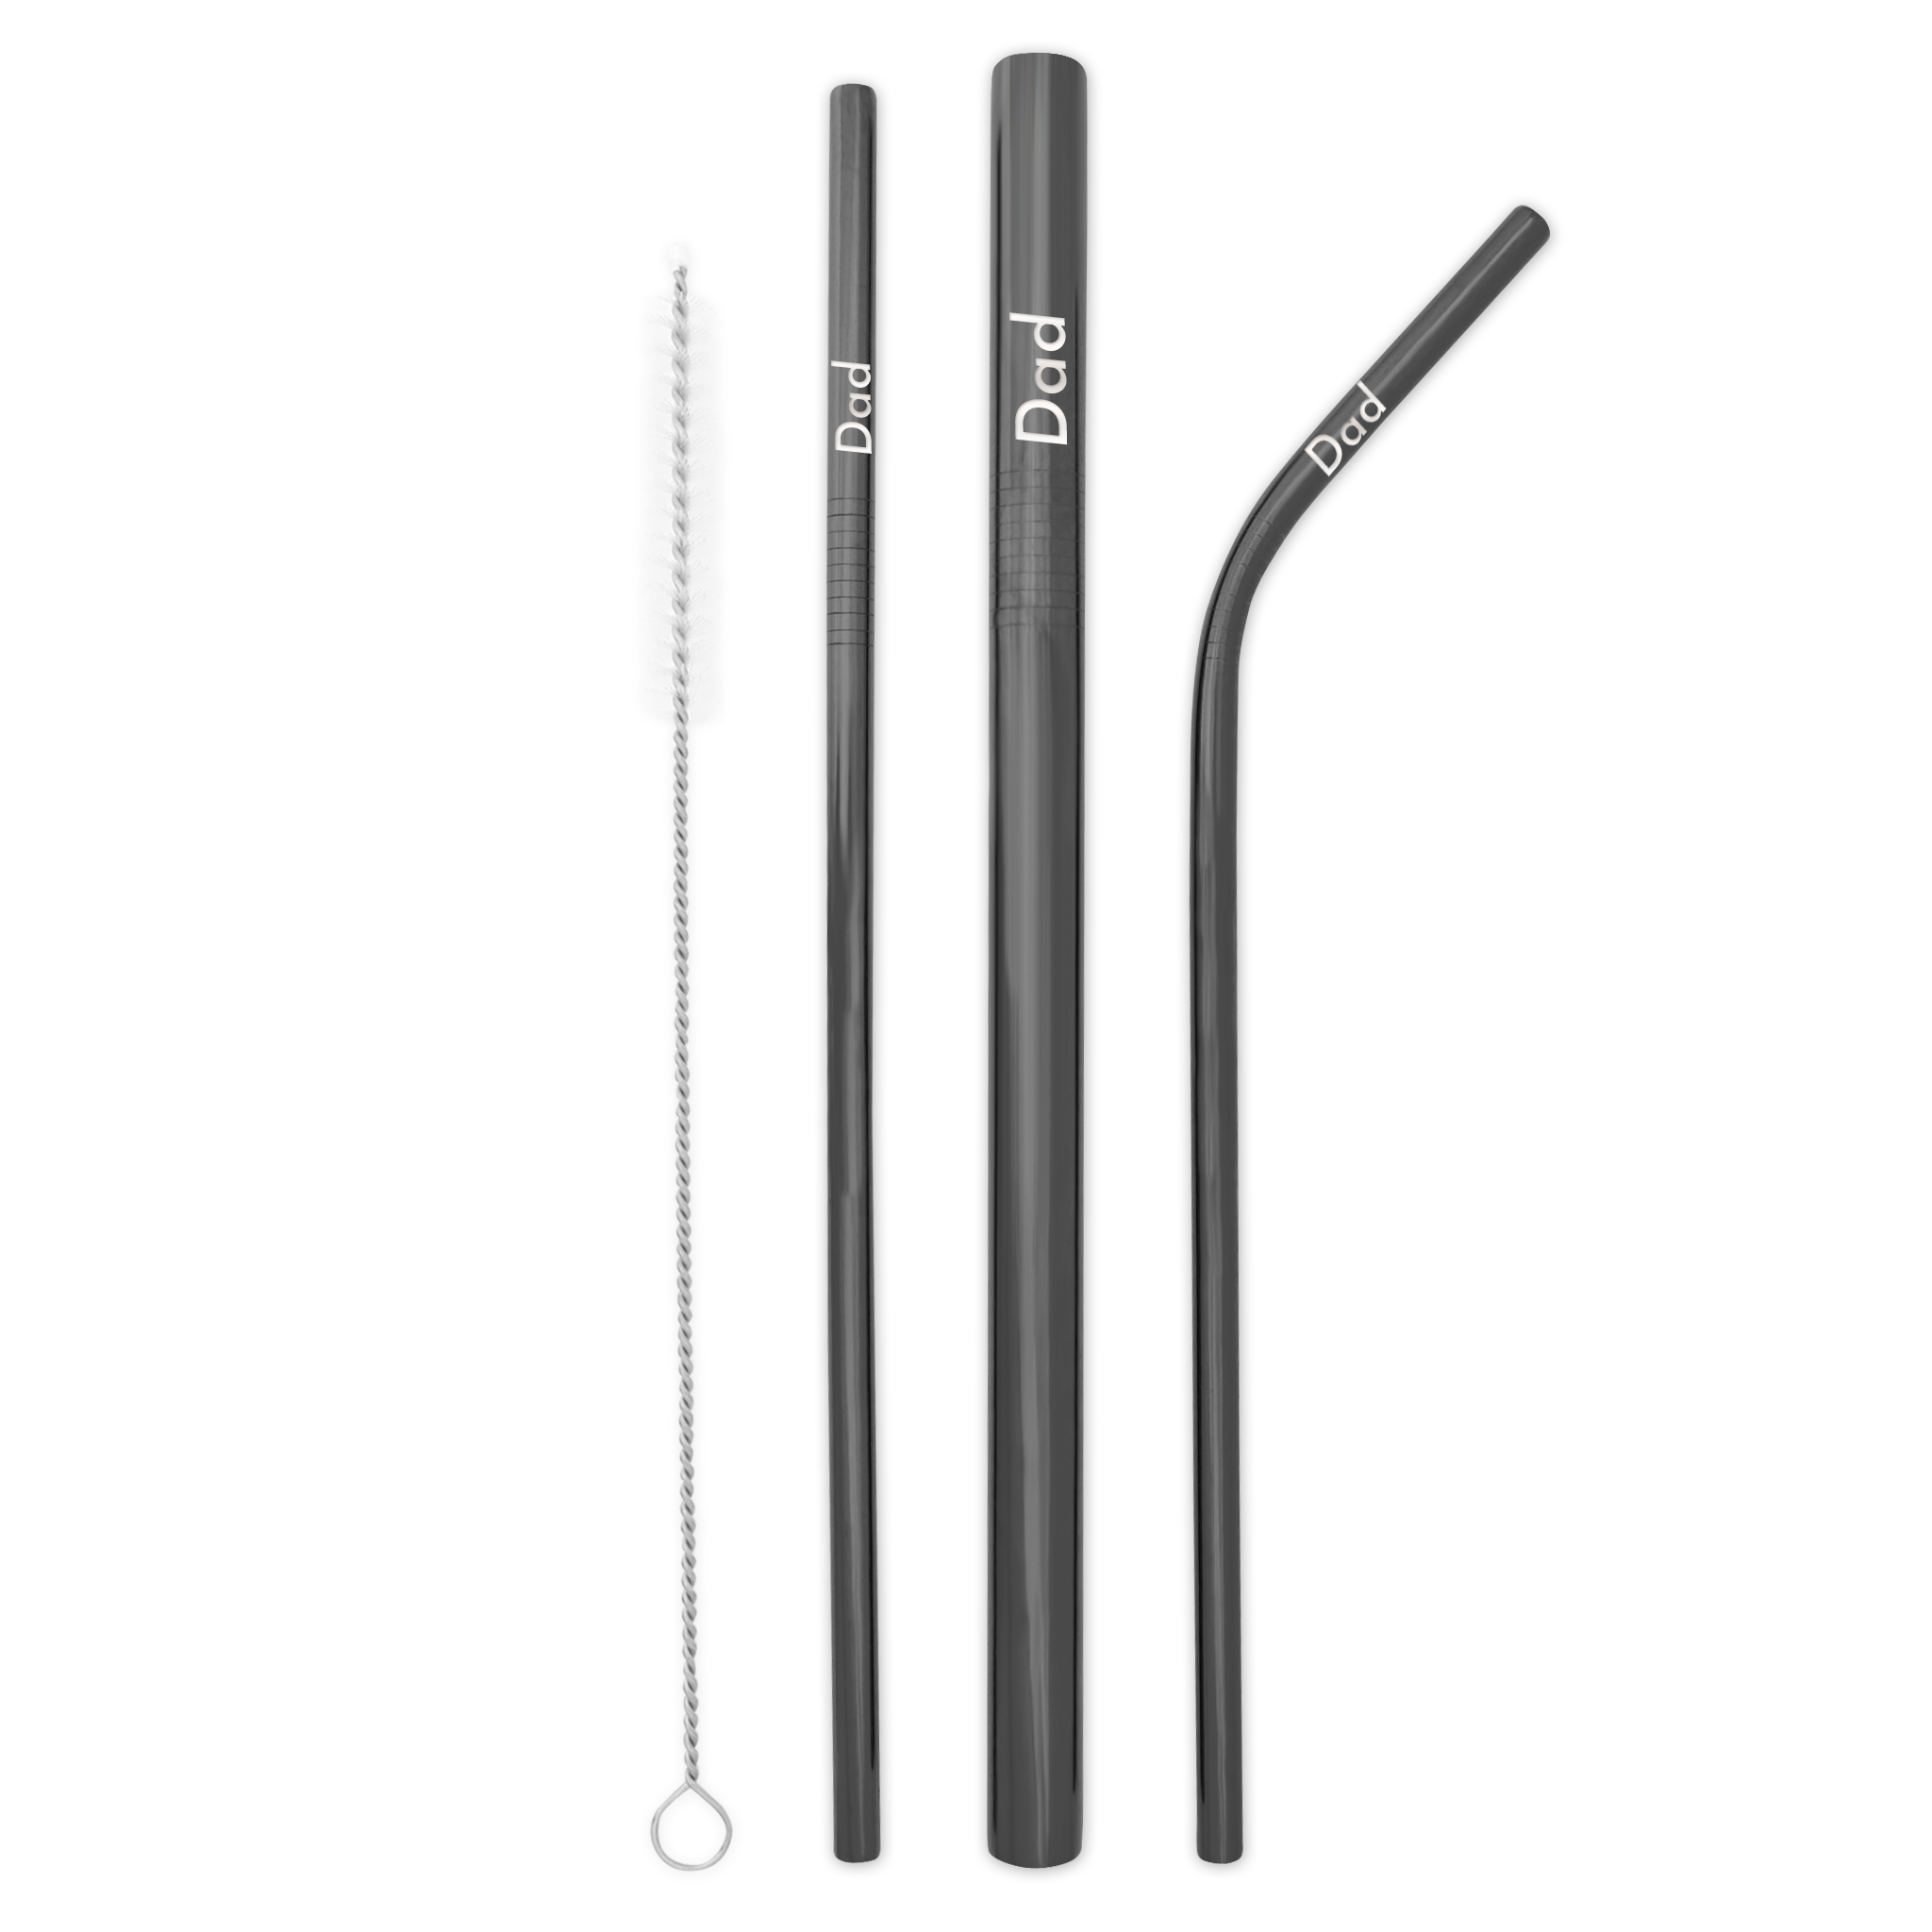 Triple Threat Stainless Steel Straw Set with Travel Pouch (Black)